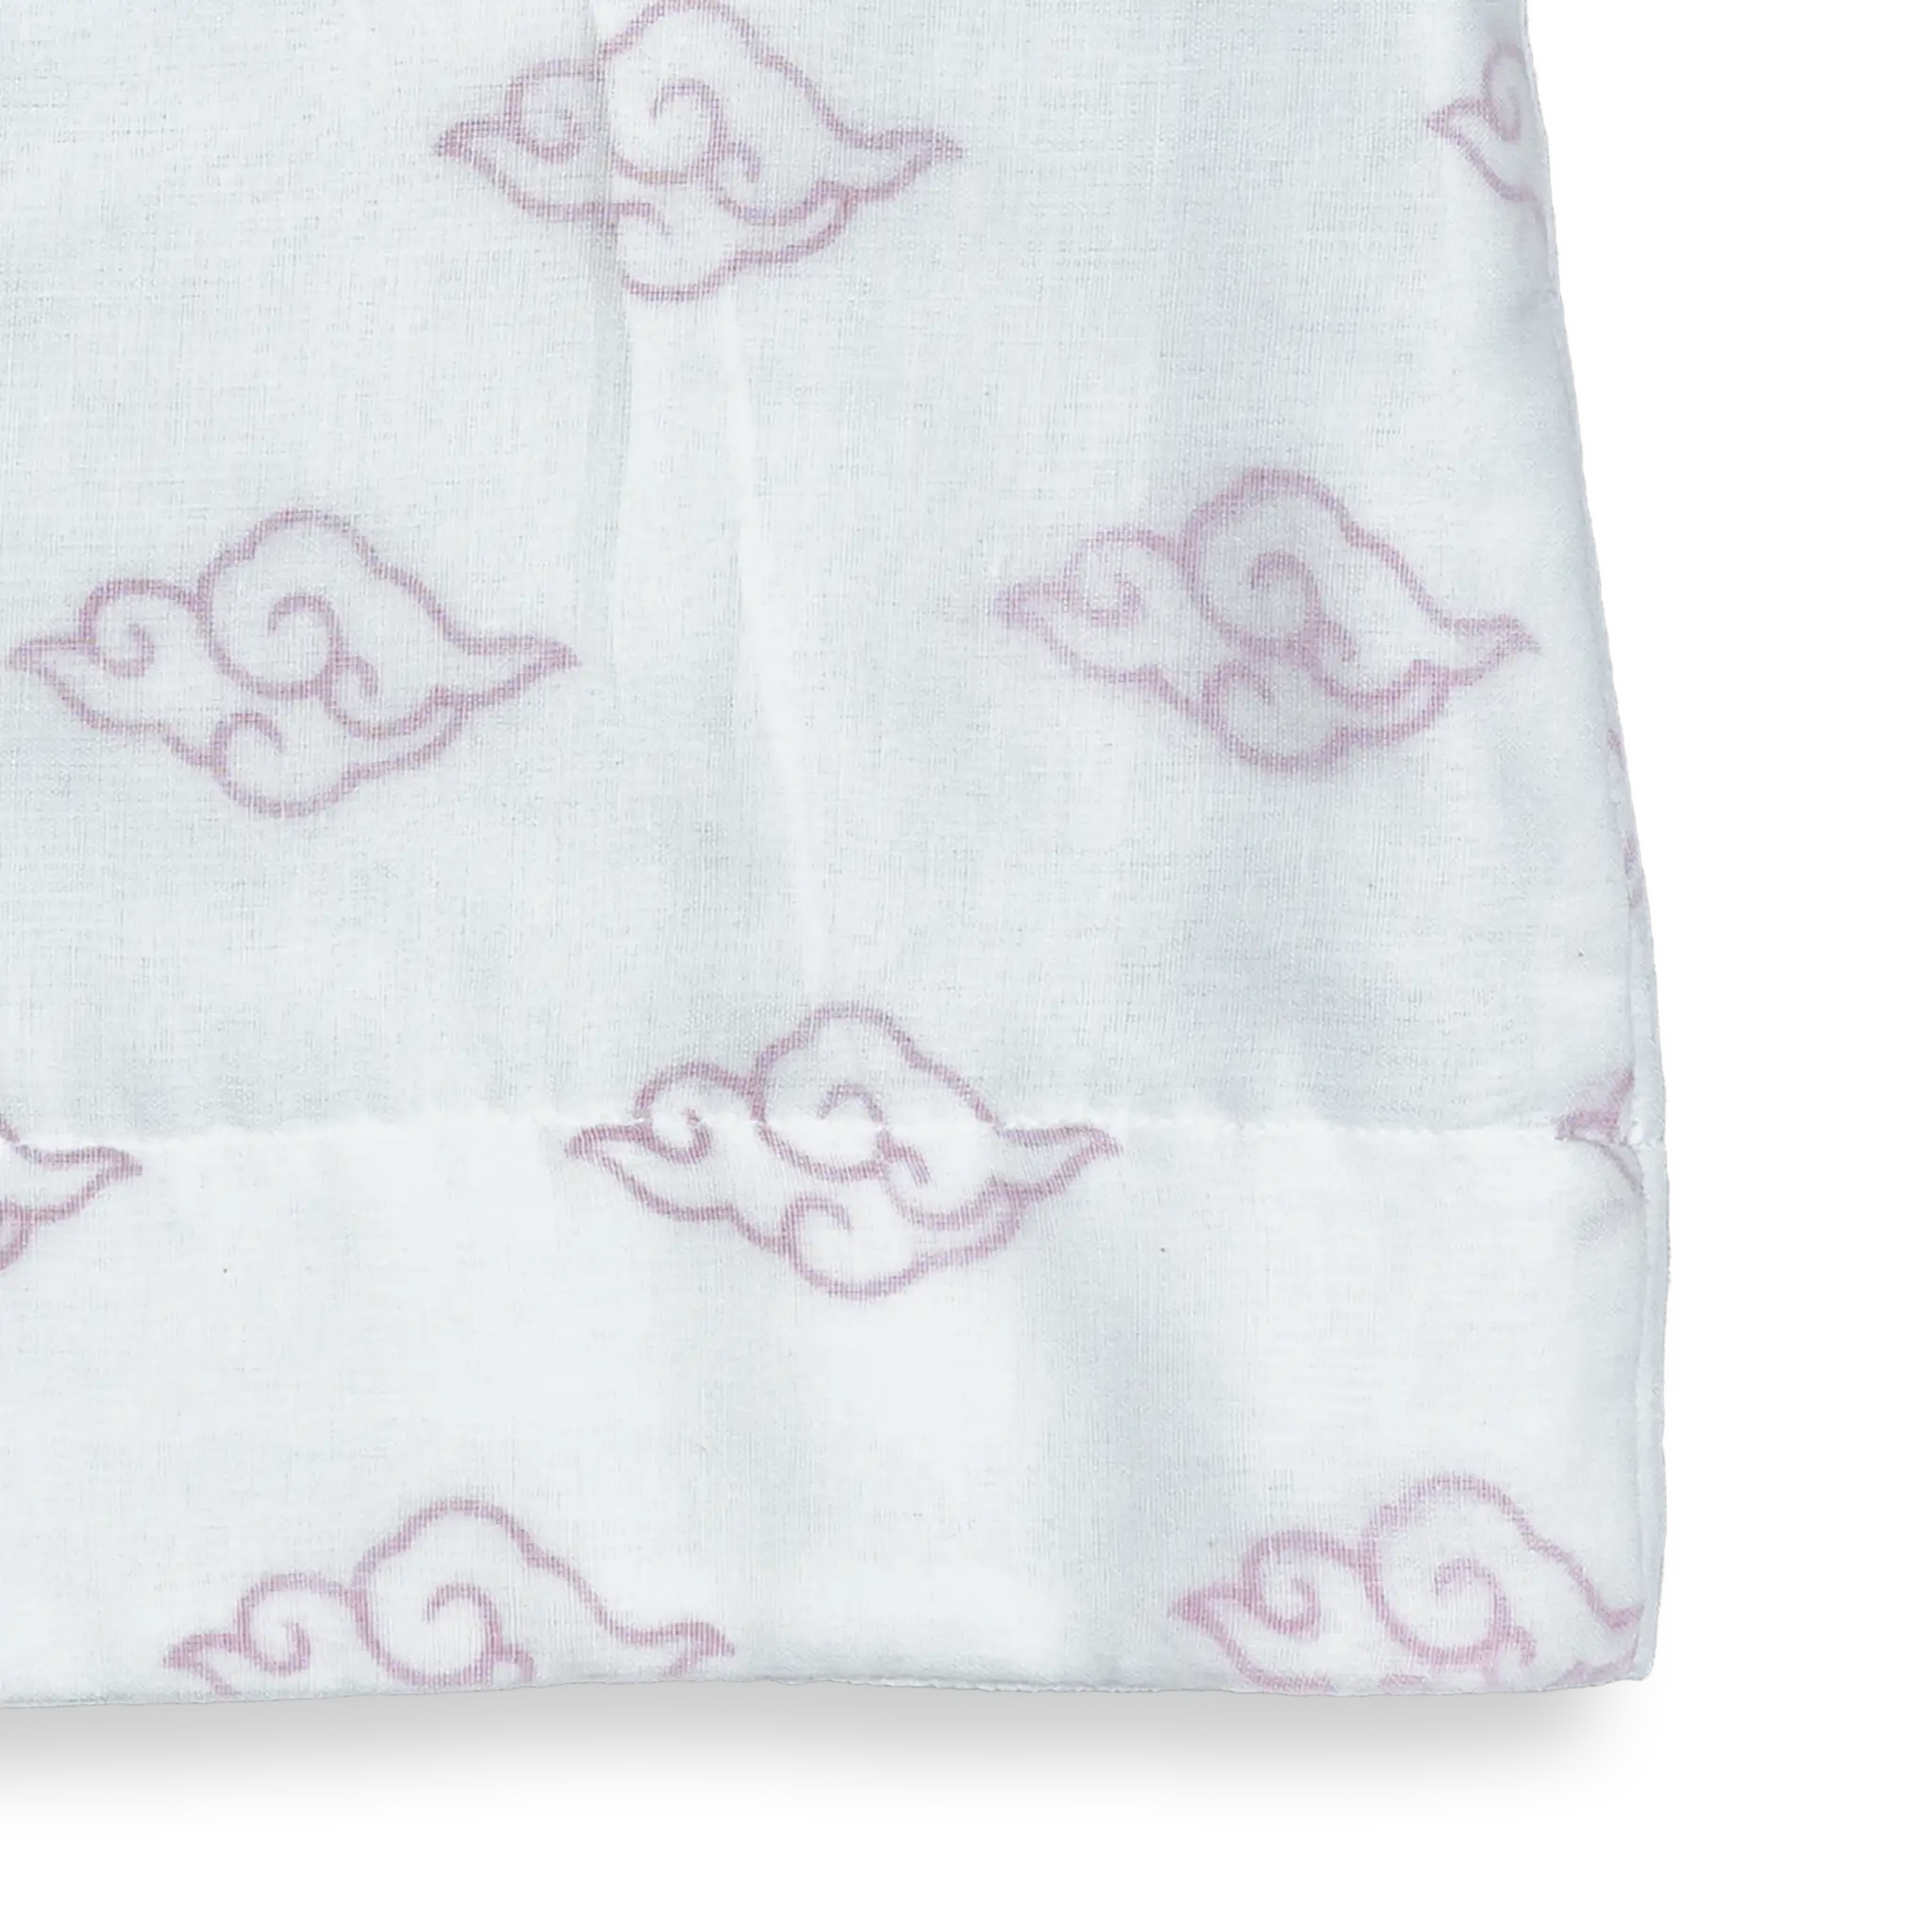 These Dresses are made with 3 layers of finest voile cotton (Mal Mal). It gives a smooth and comforting feel to your baby's skin. Easy wear and good for the skin.